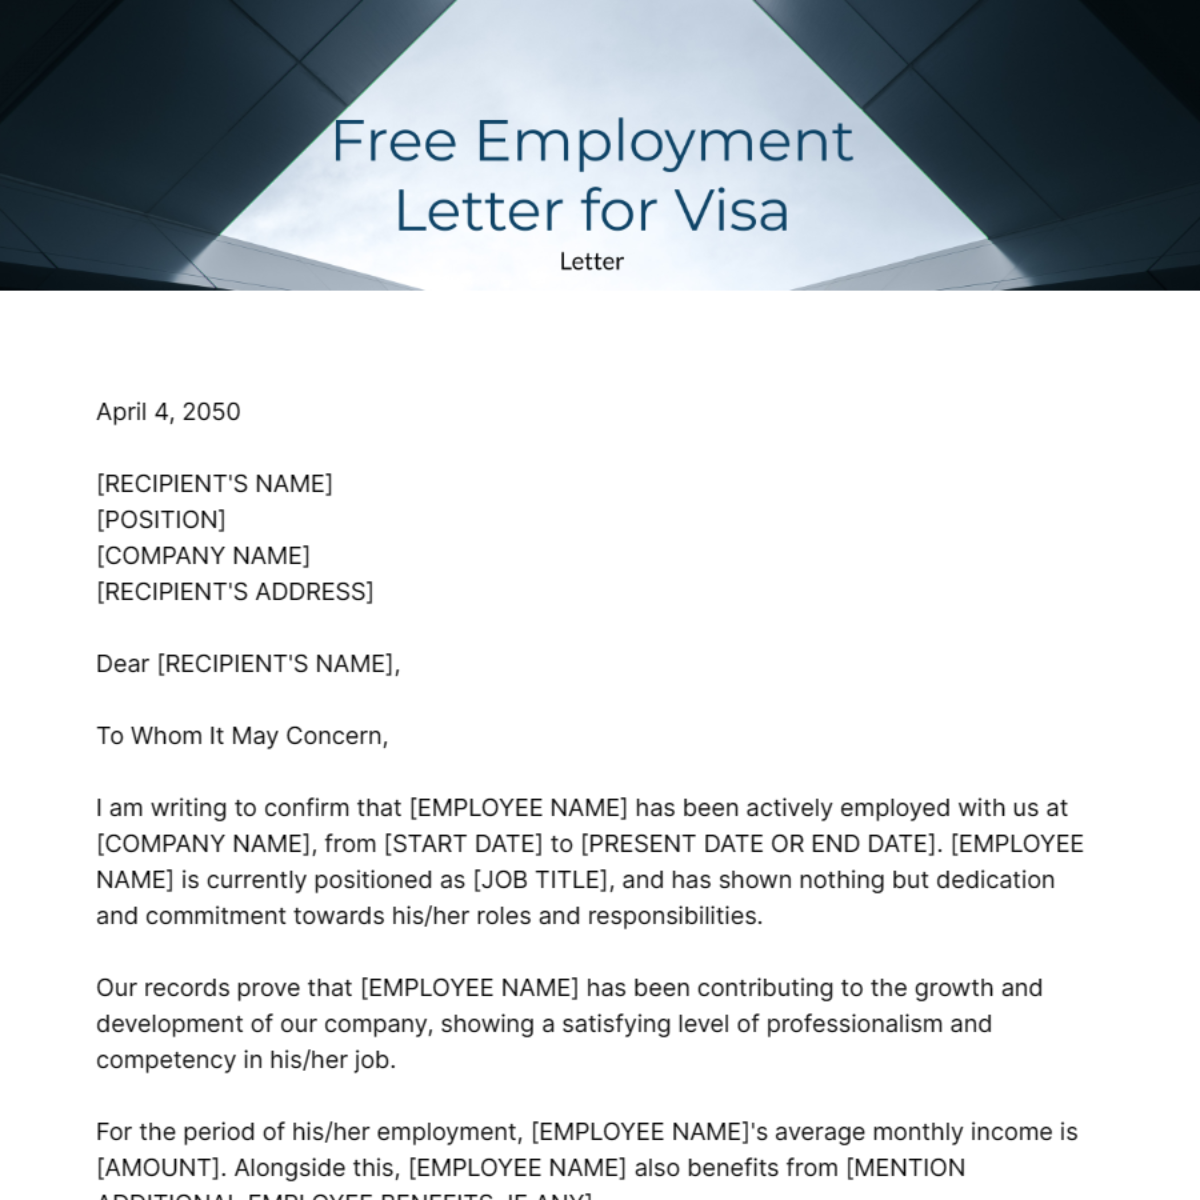 Employment Letter for Visa Template